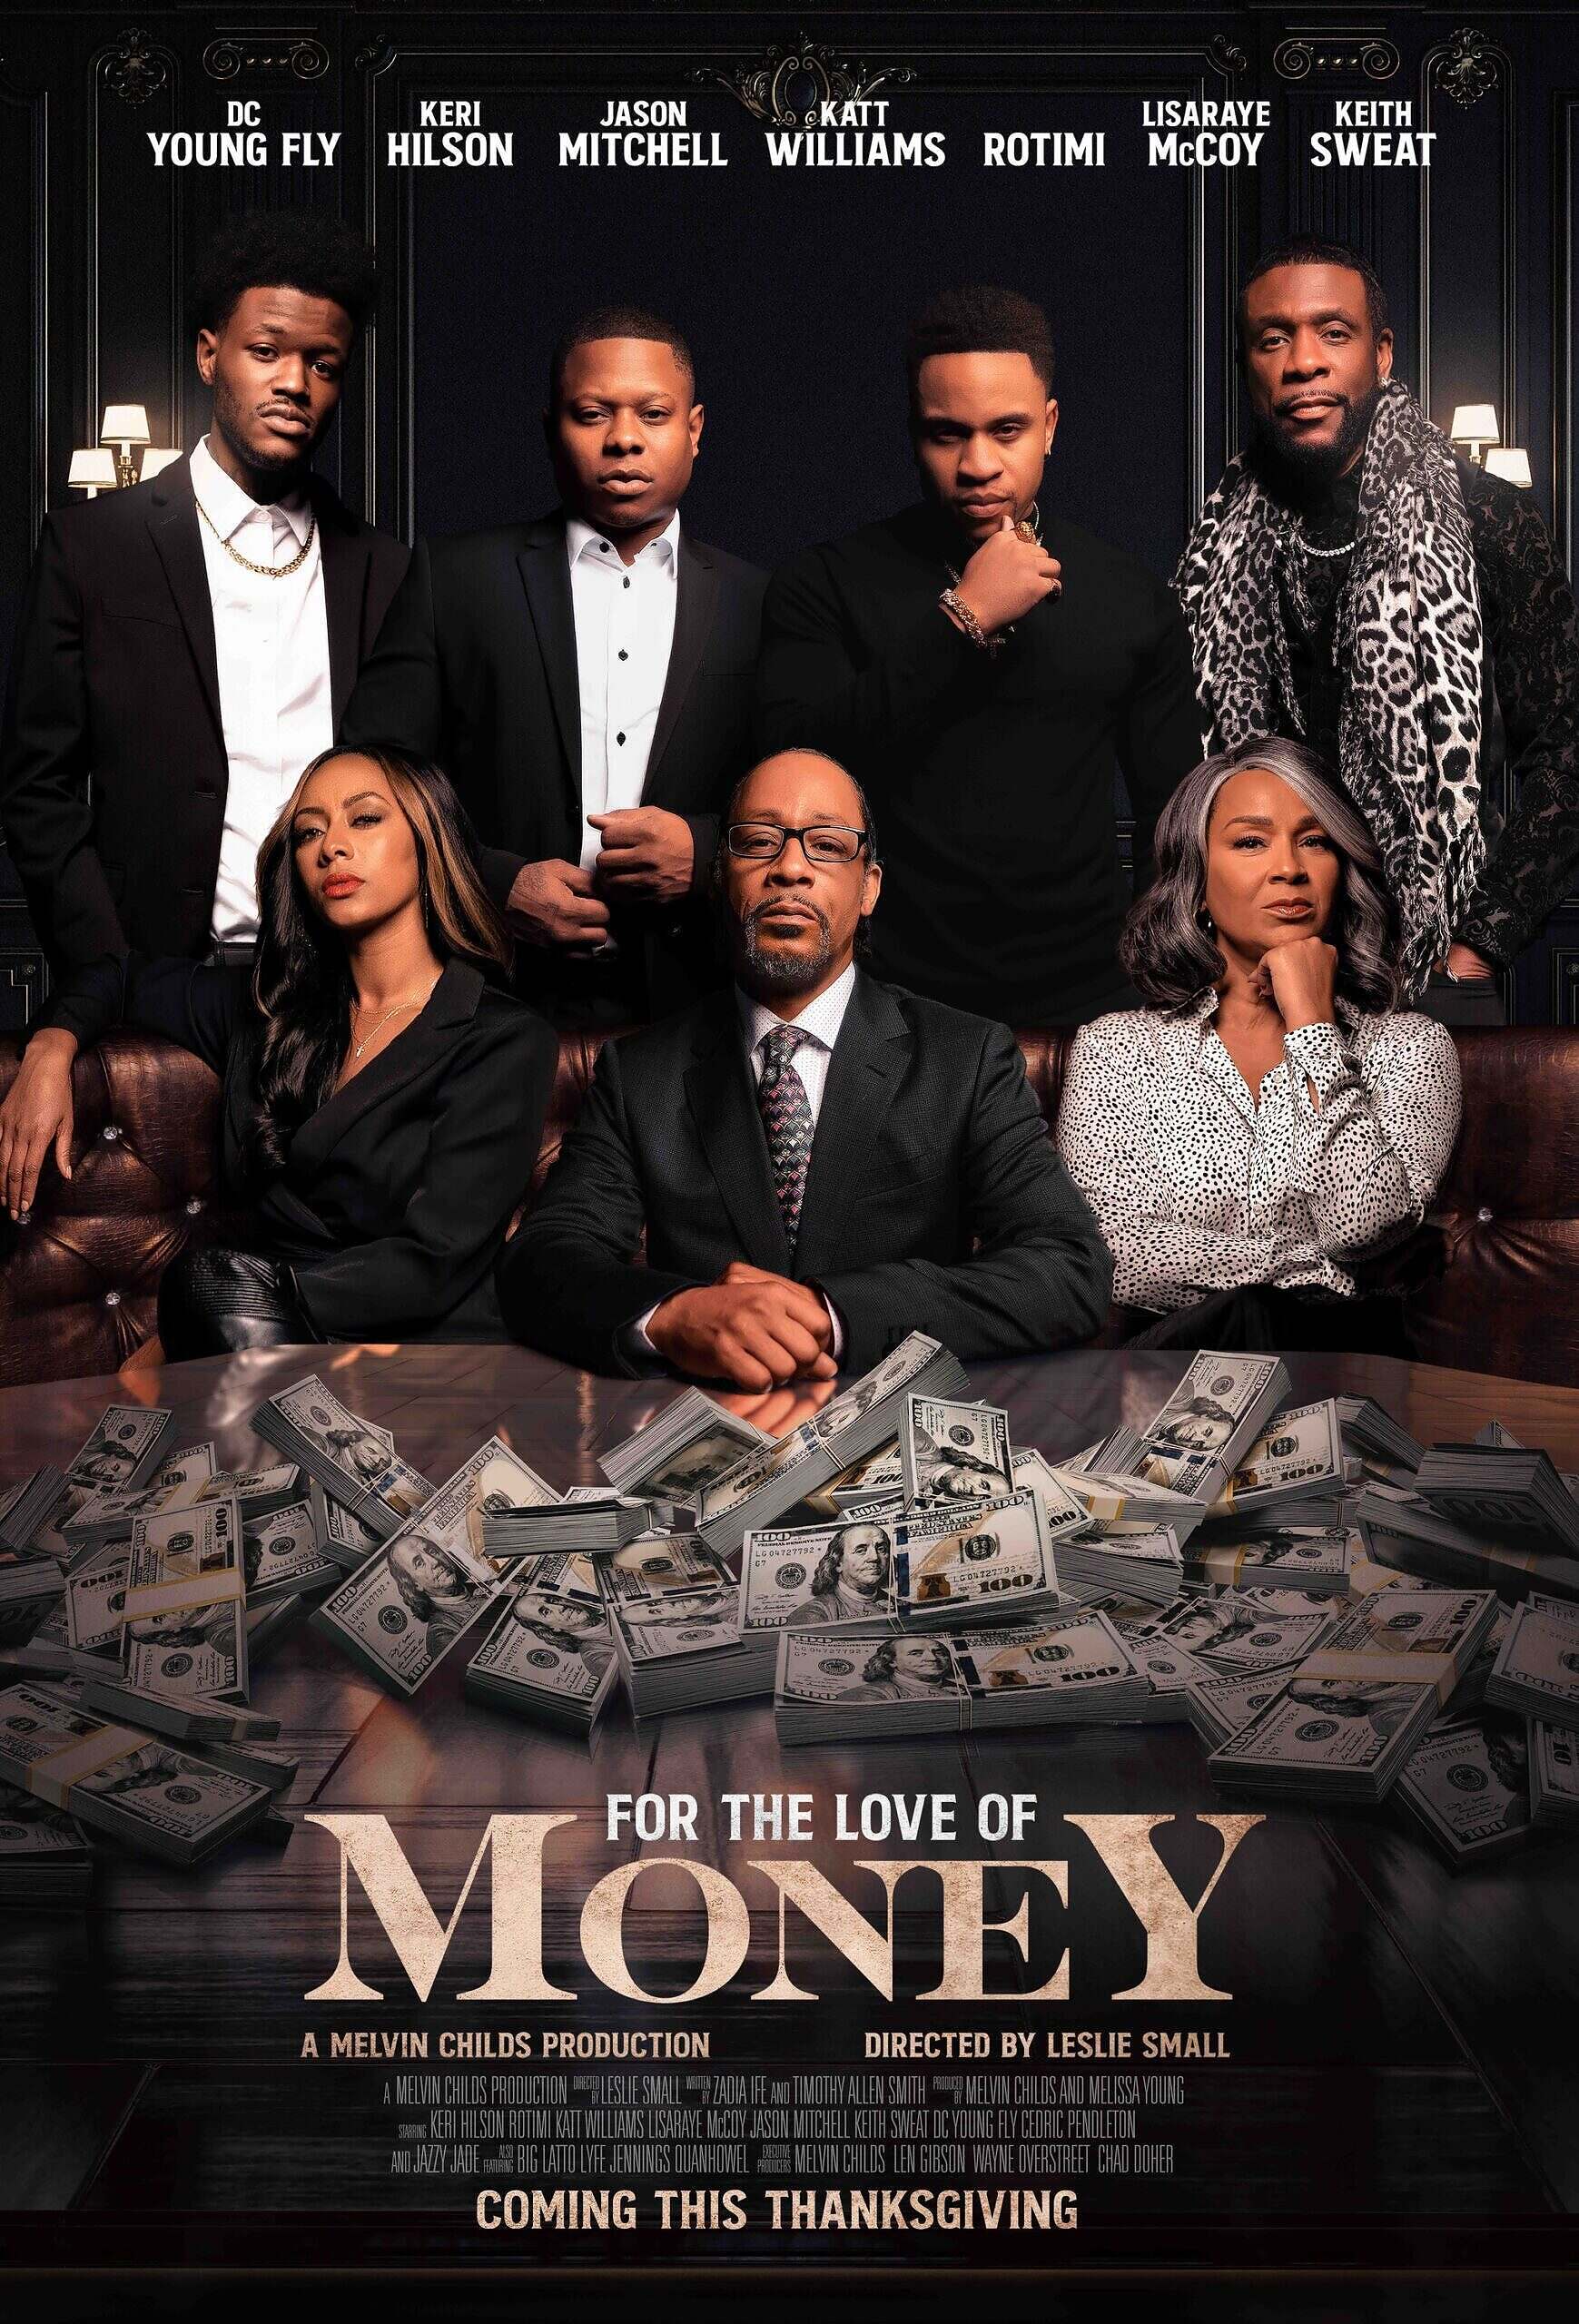 2nd Trailer For ‘Melvin Childs’ For The Love Of Money’ Movie Starring Keri Hilson, DC Young Fly, & Keith Sweat